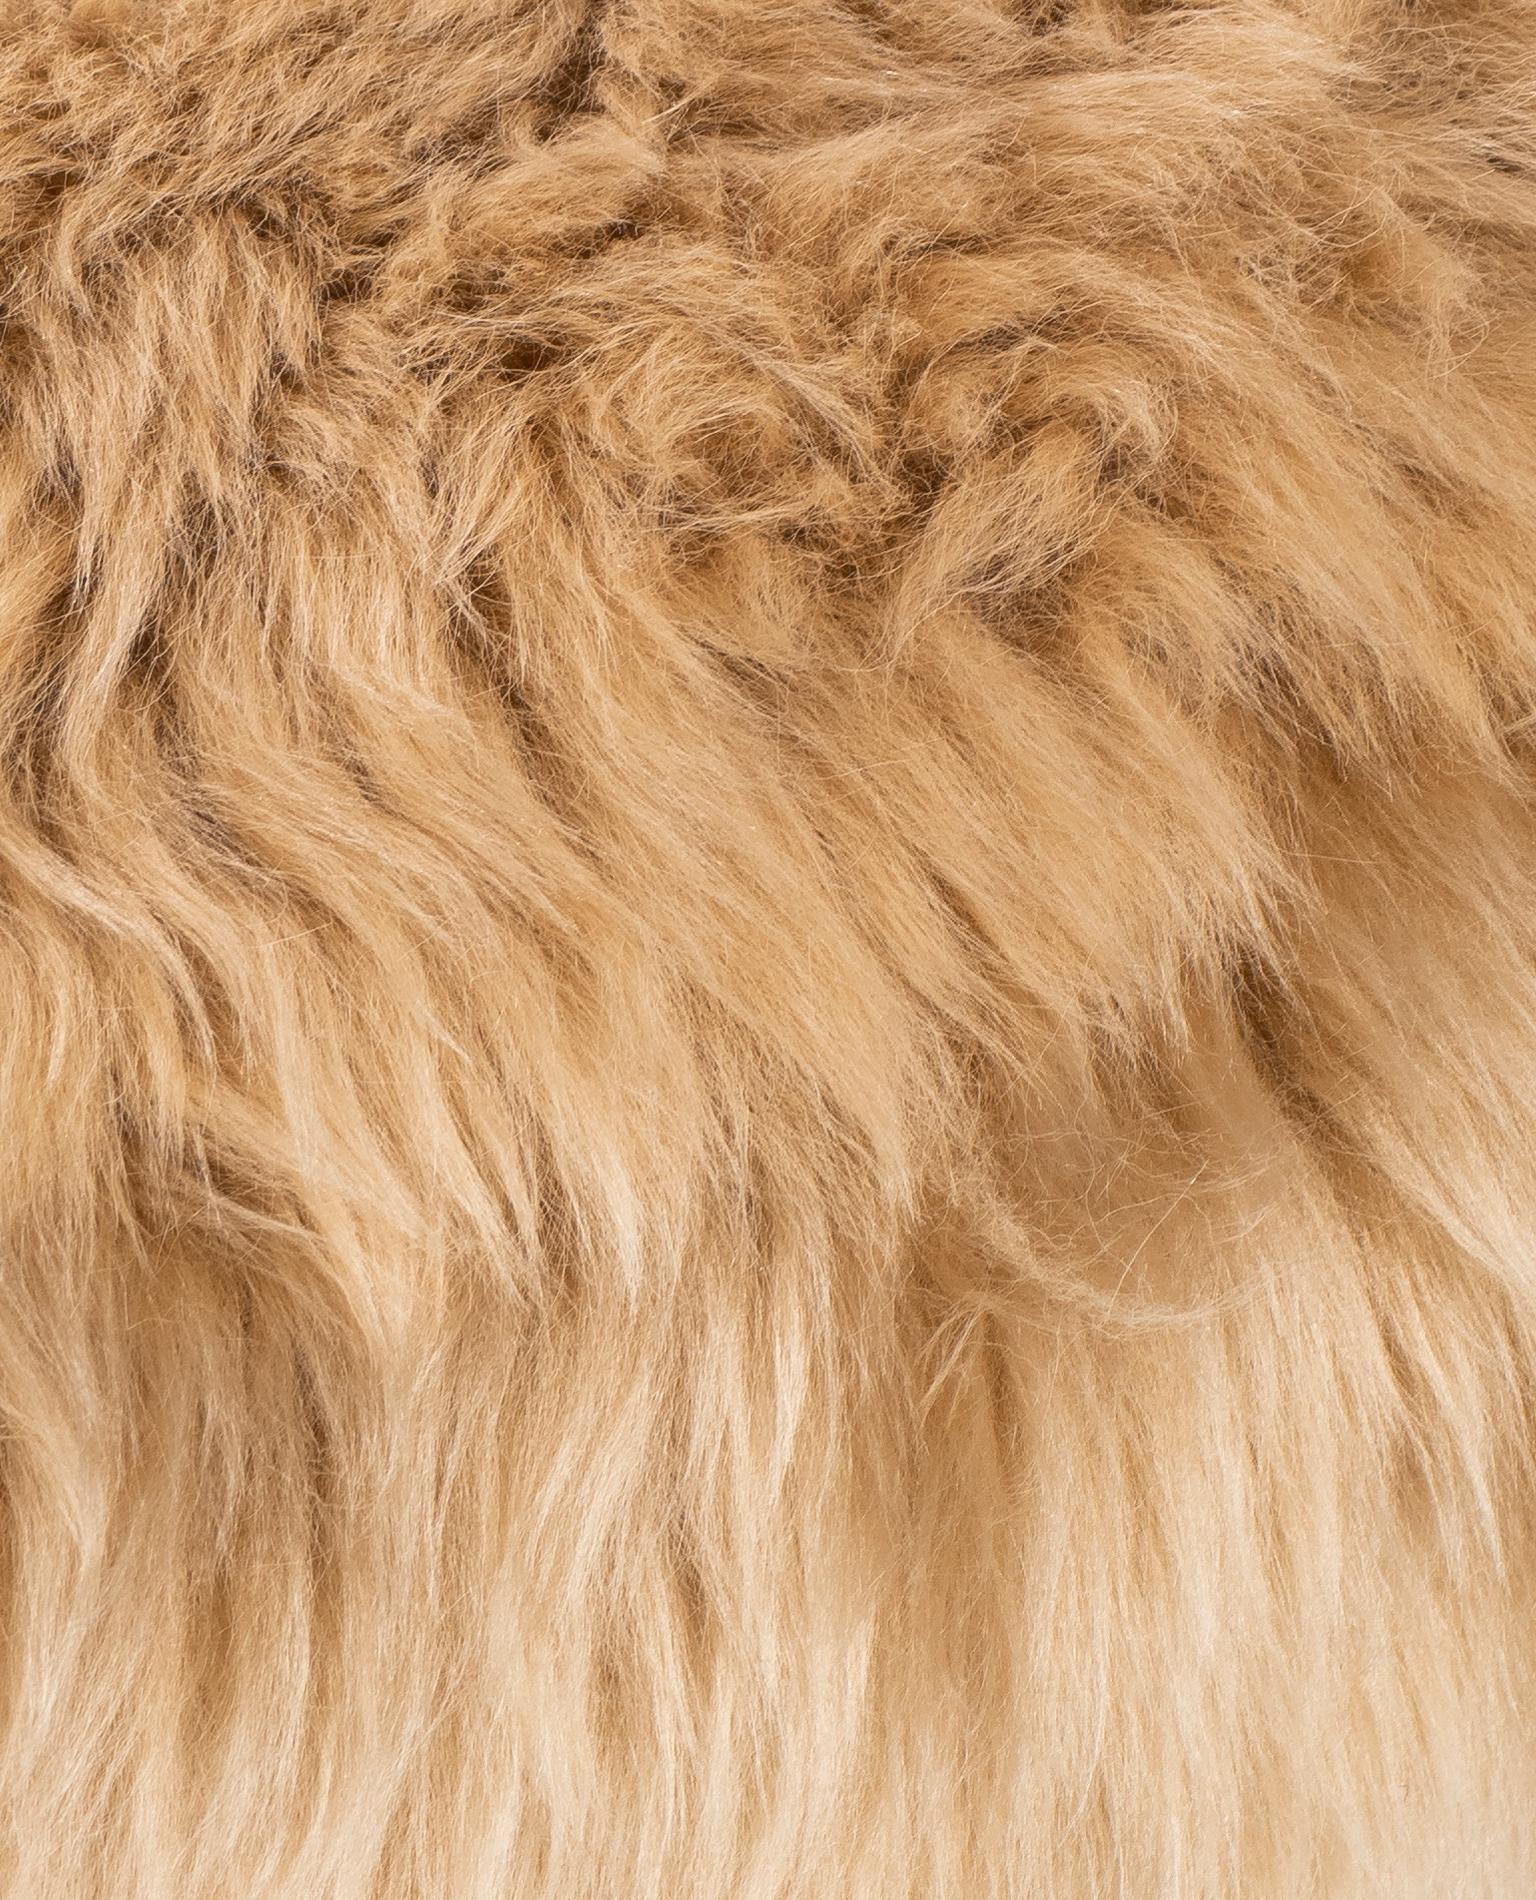 Brushed Organic Modern Country Stool in Polished Brass Cast and Natural Camel Lamb Fur For Sale